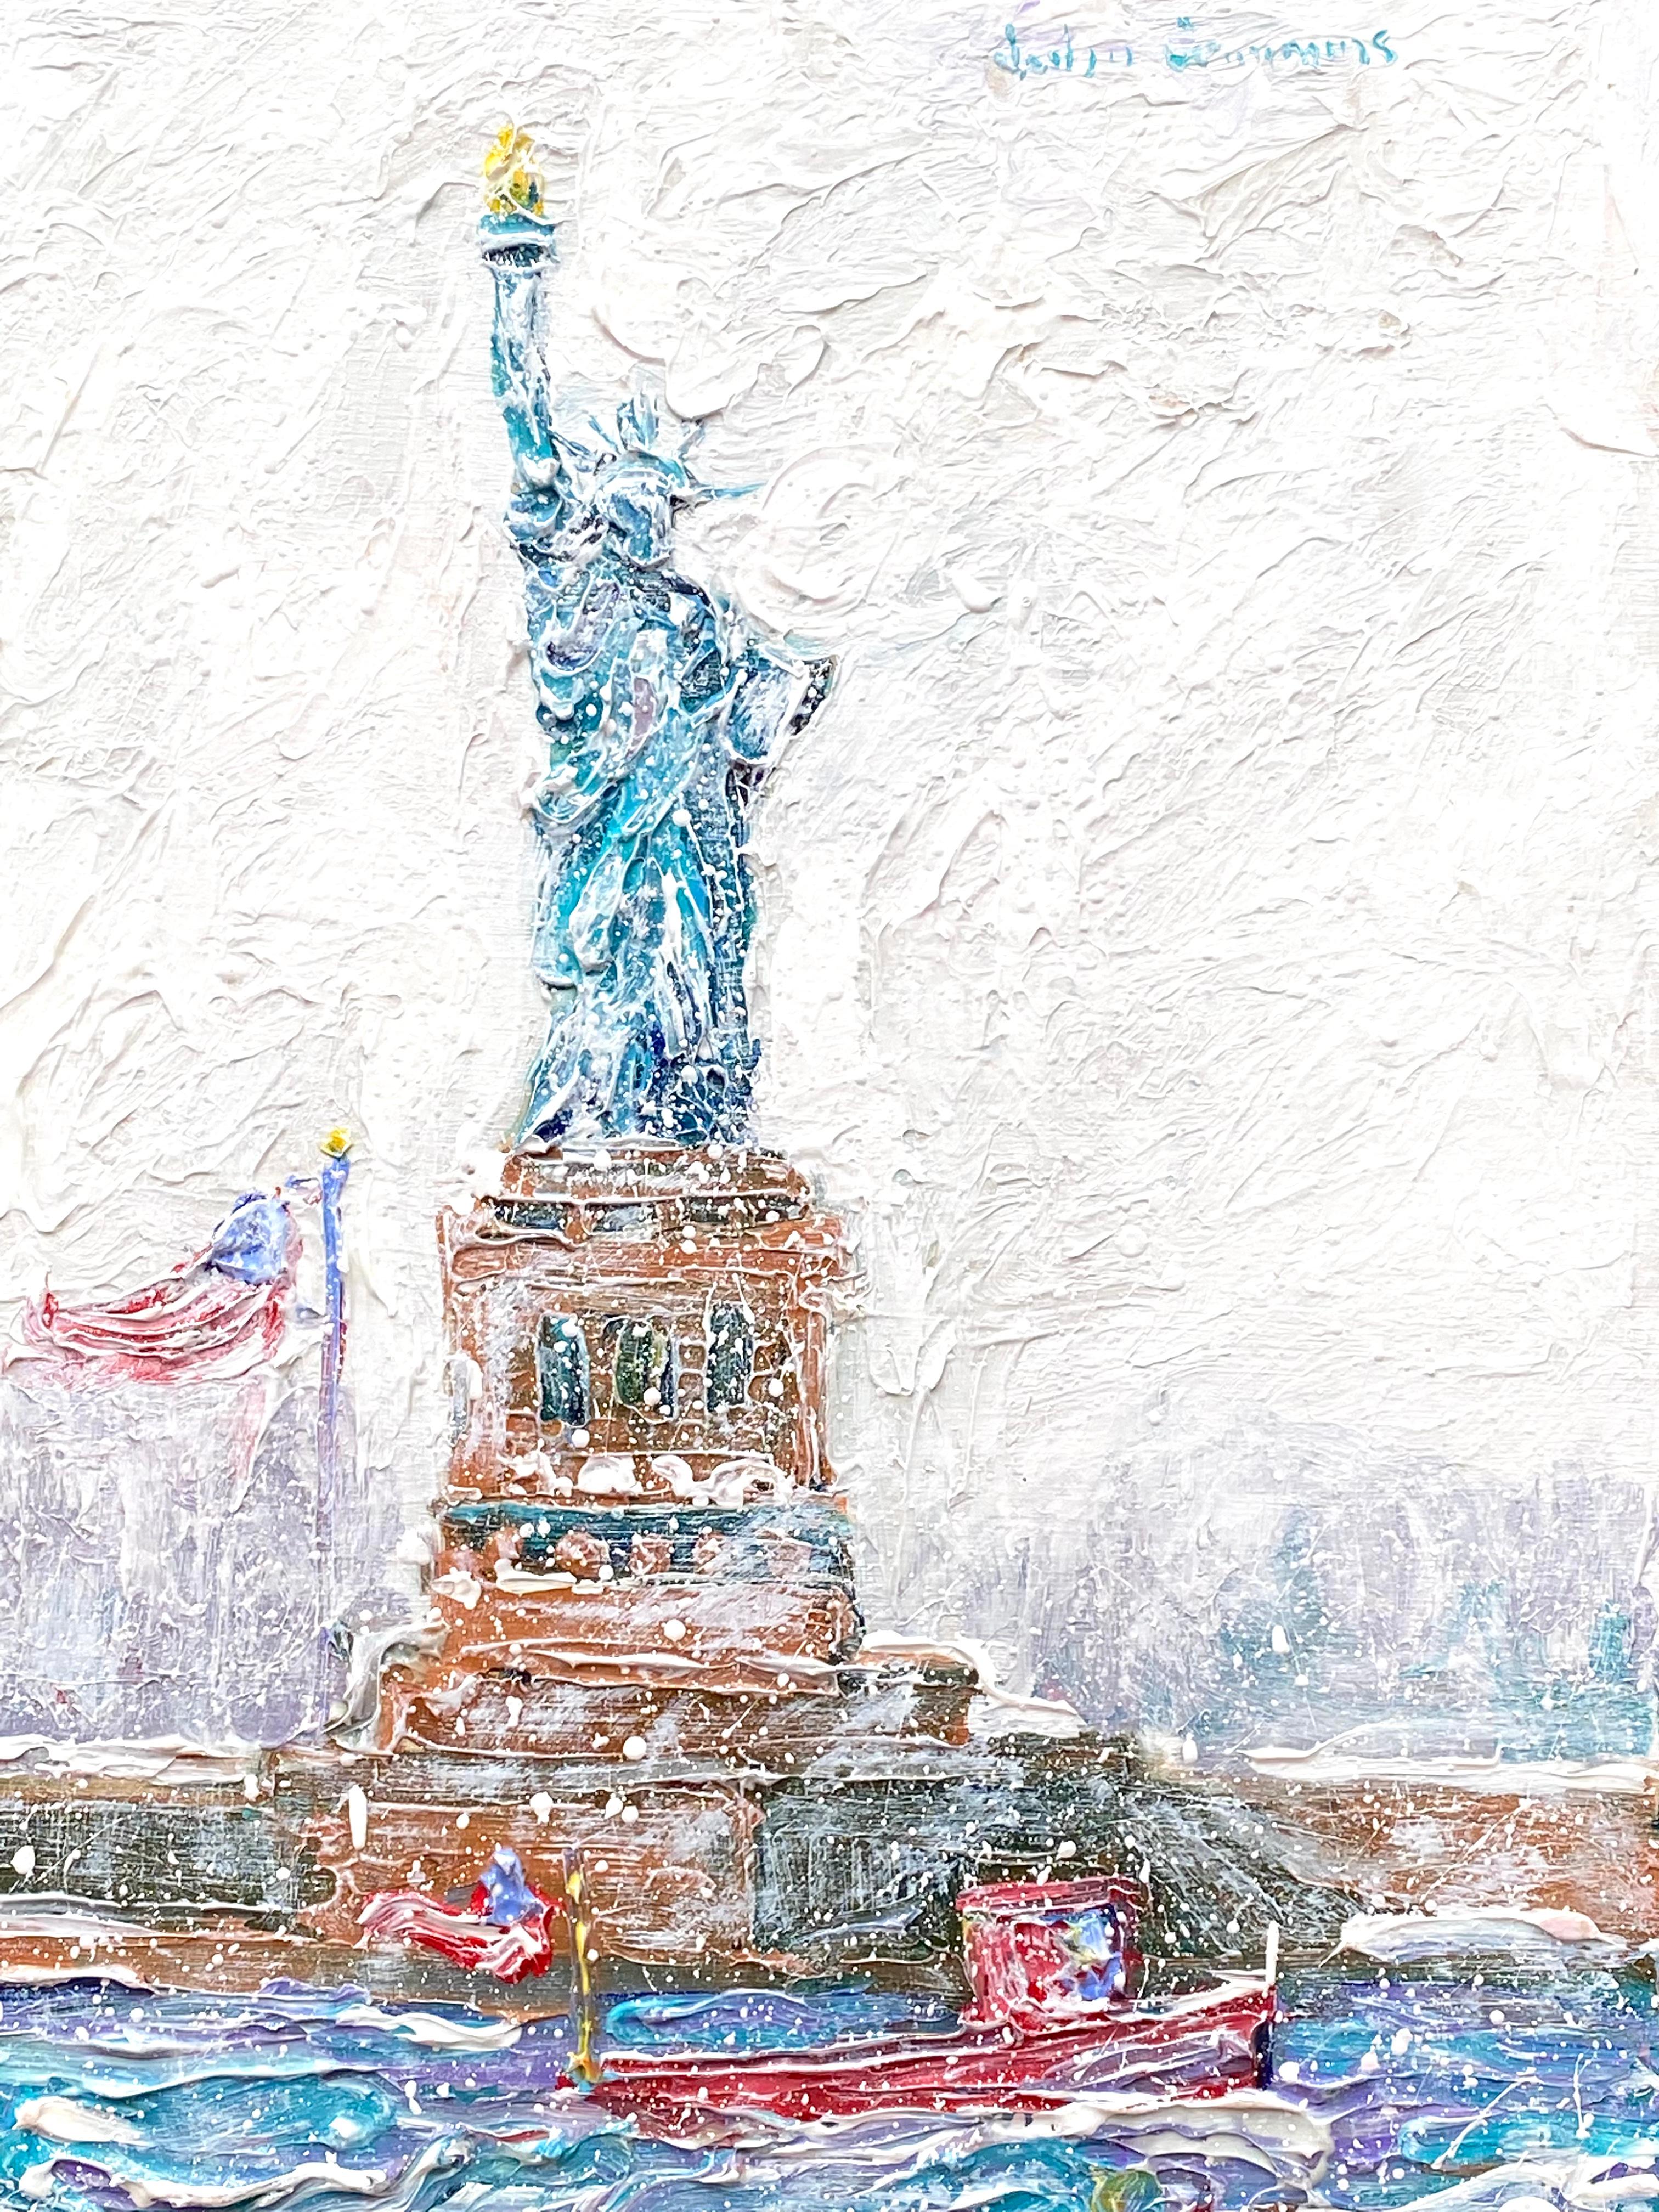 “Statue of Liberty” - Painting by John Crimmins